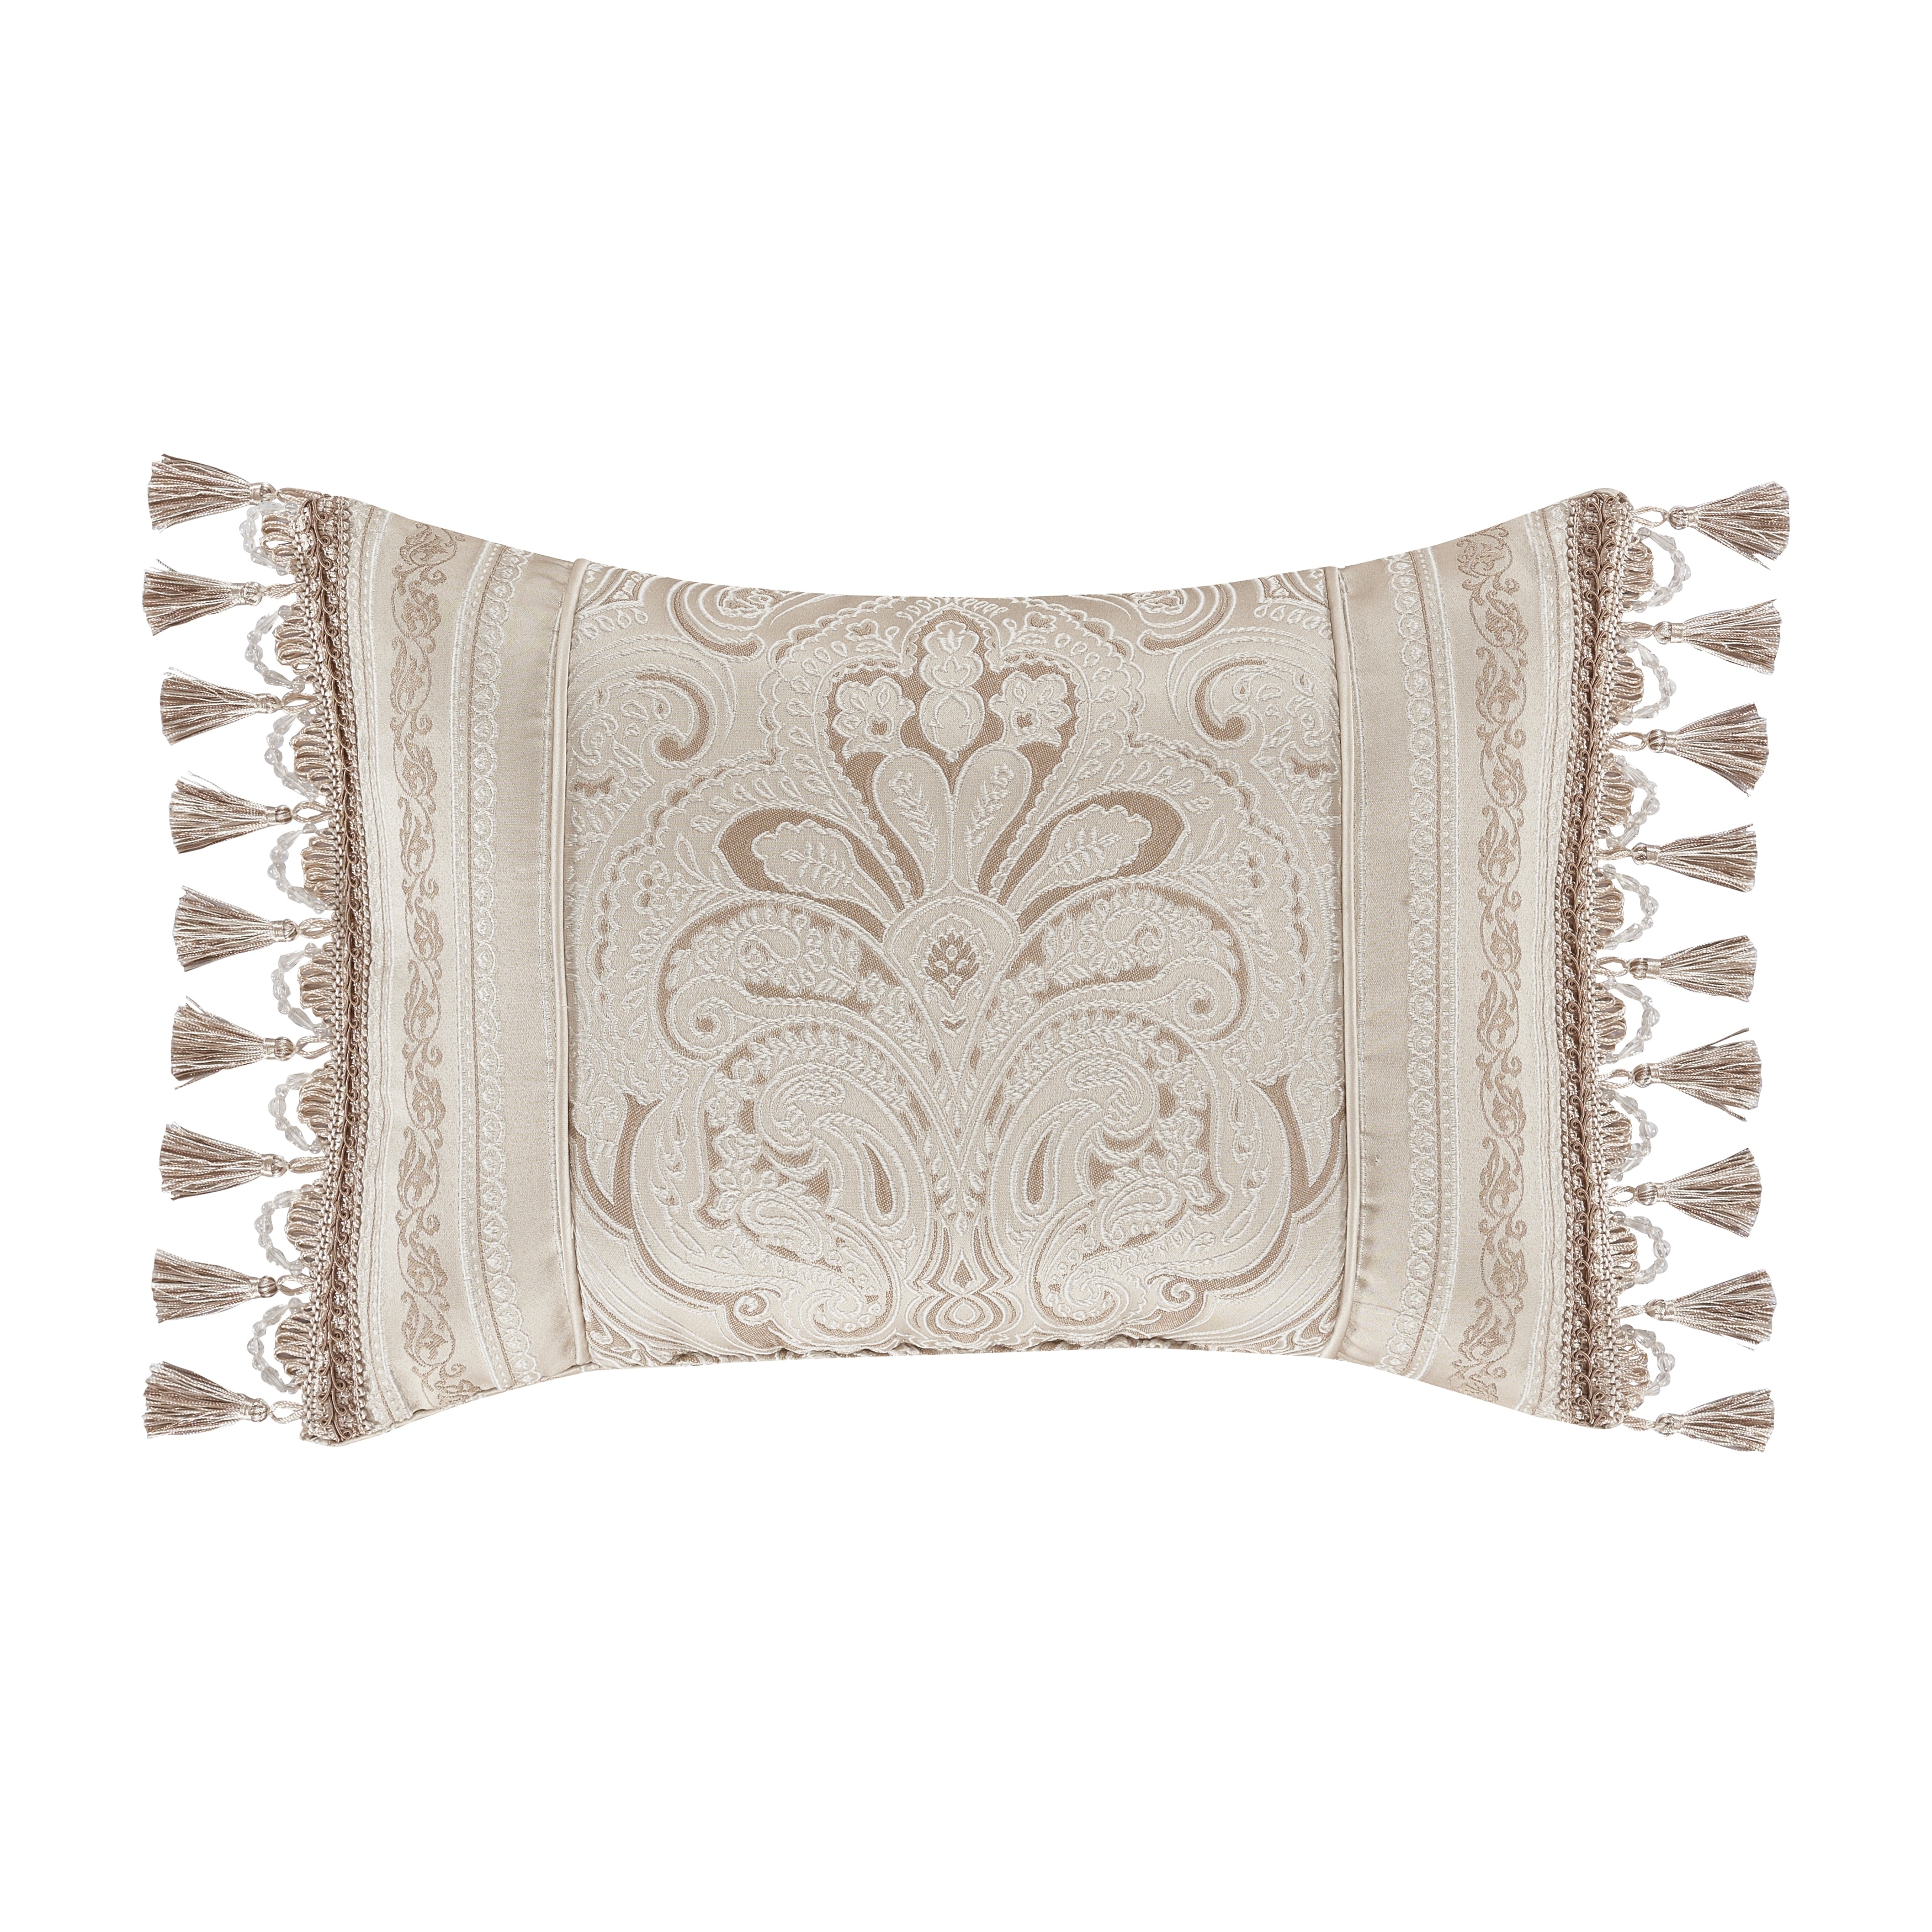 Trinity Boho Tufted Tassels Chenille Decorative Throw Pillow Covers, Beige, 18 x 18 Inches